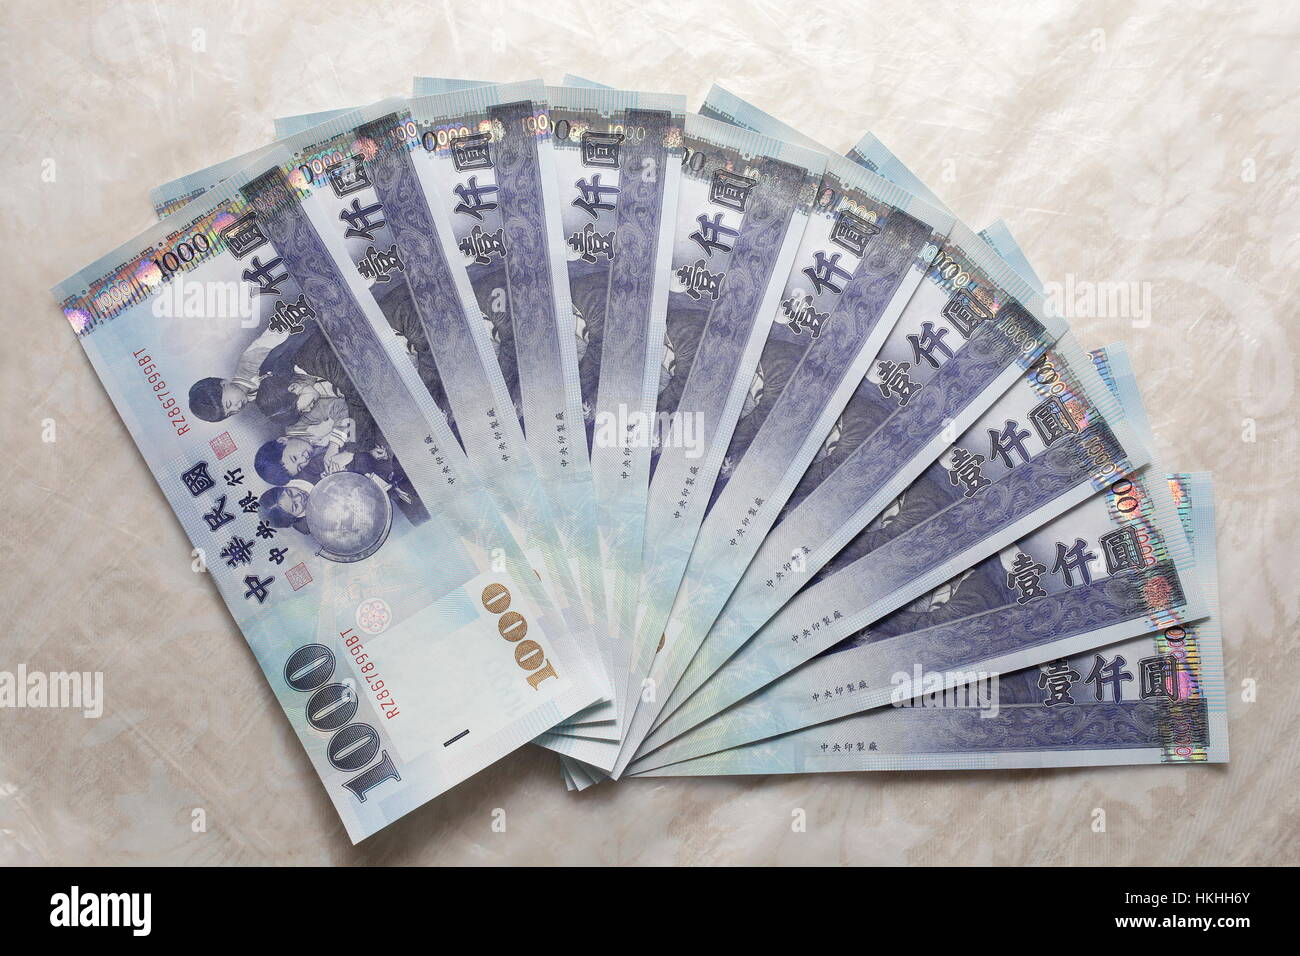 New Taiwan Dollar High Resolution Stock Photography And Images Alamy